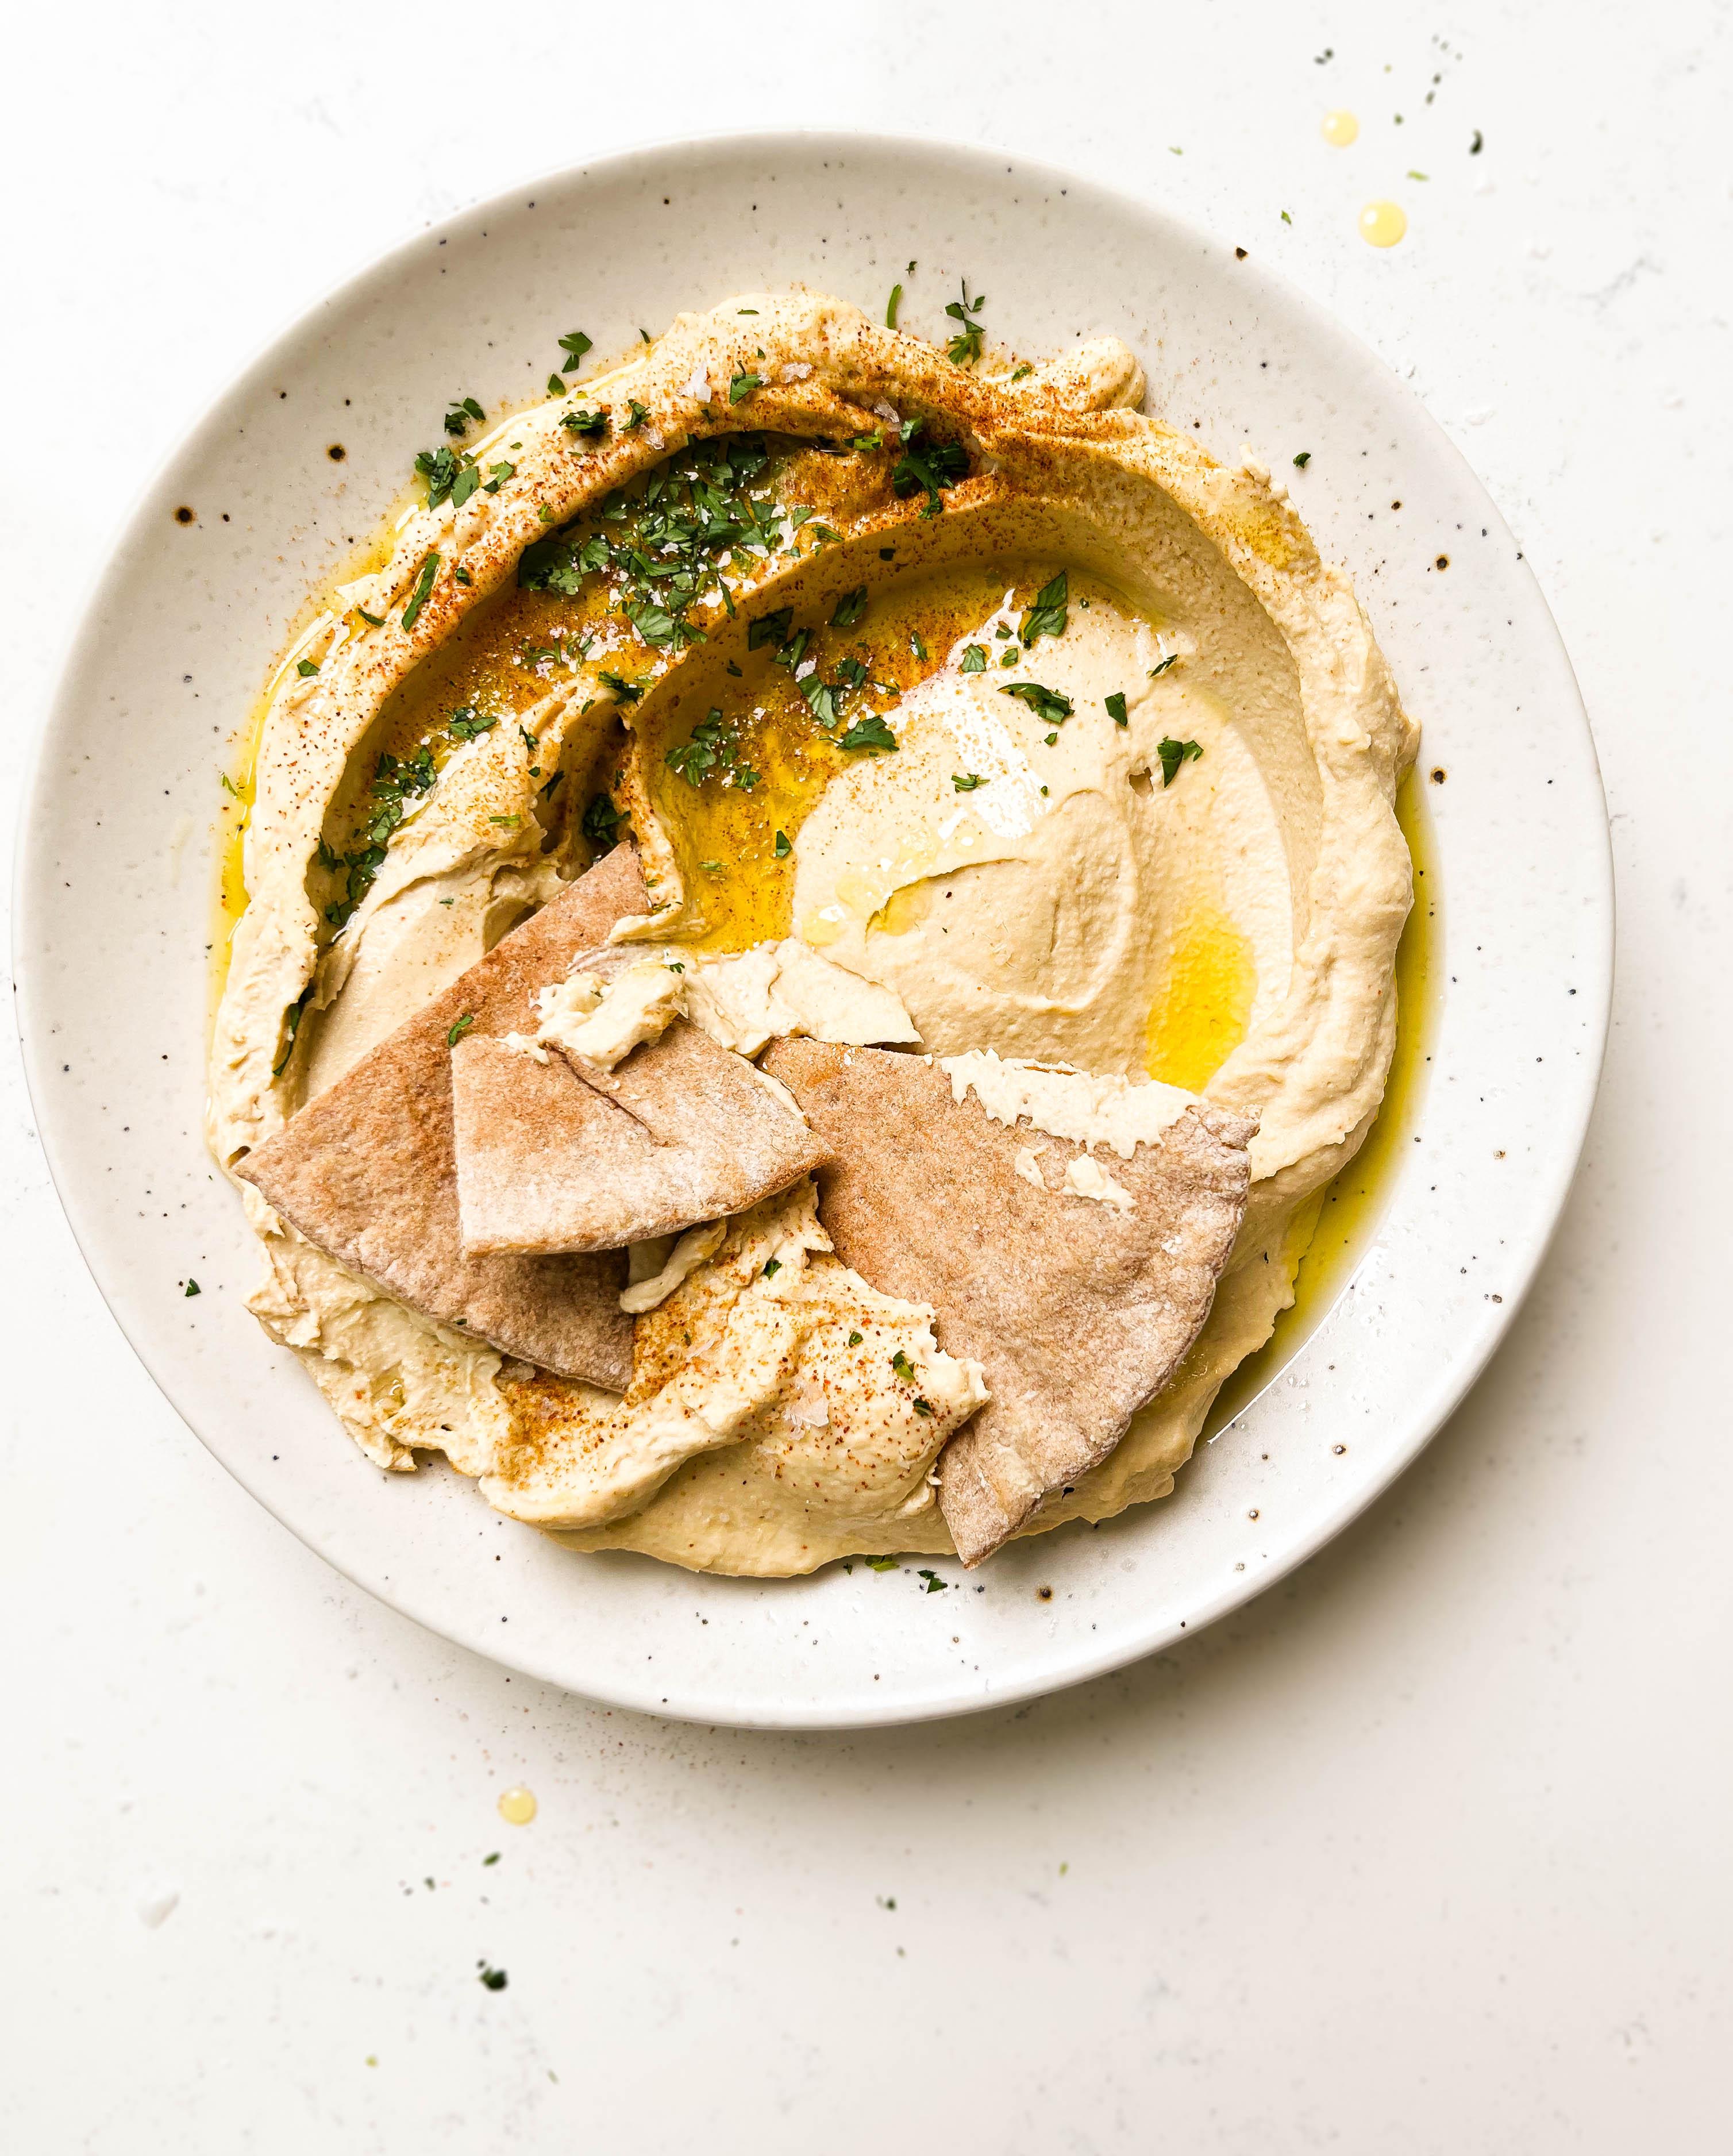 homemade hummus on a speckled plate with pita bread